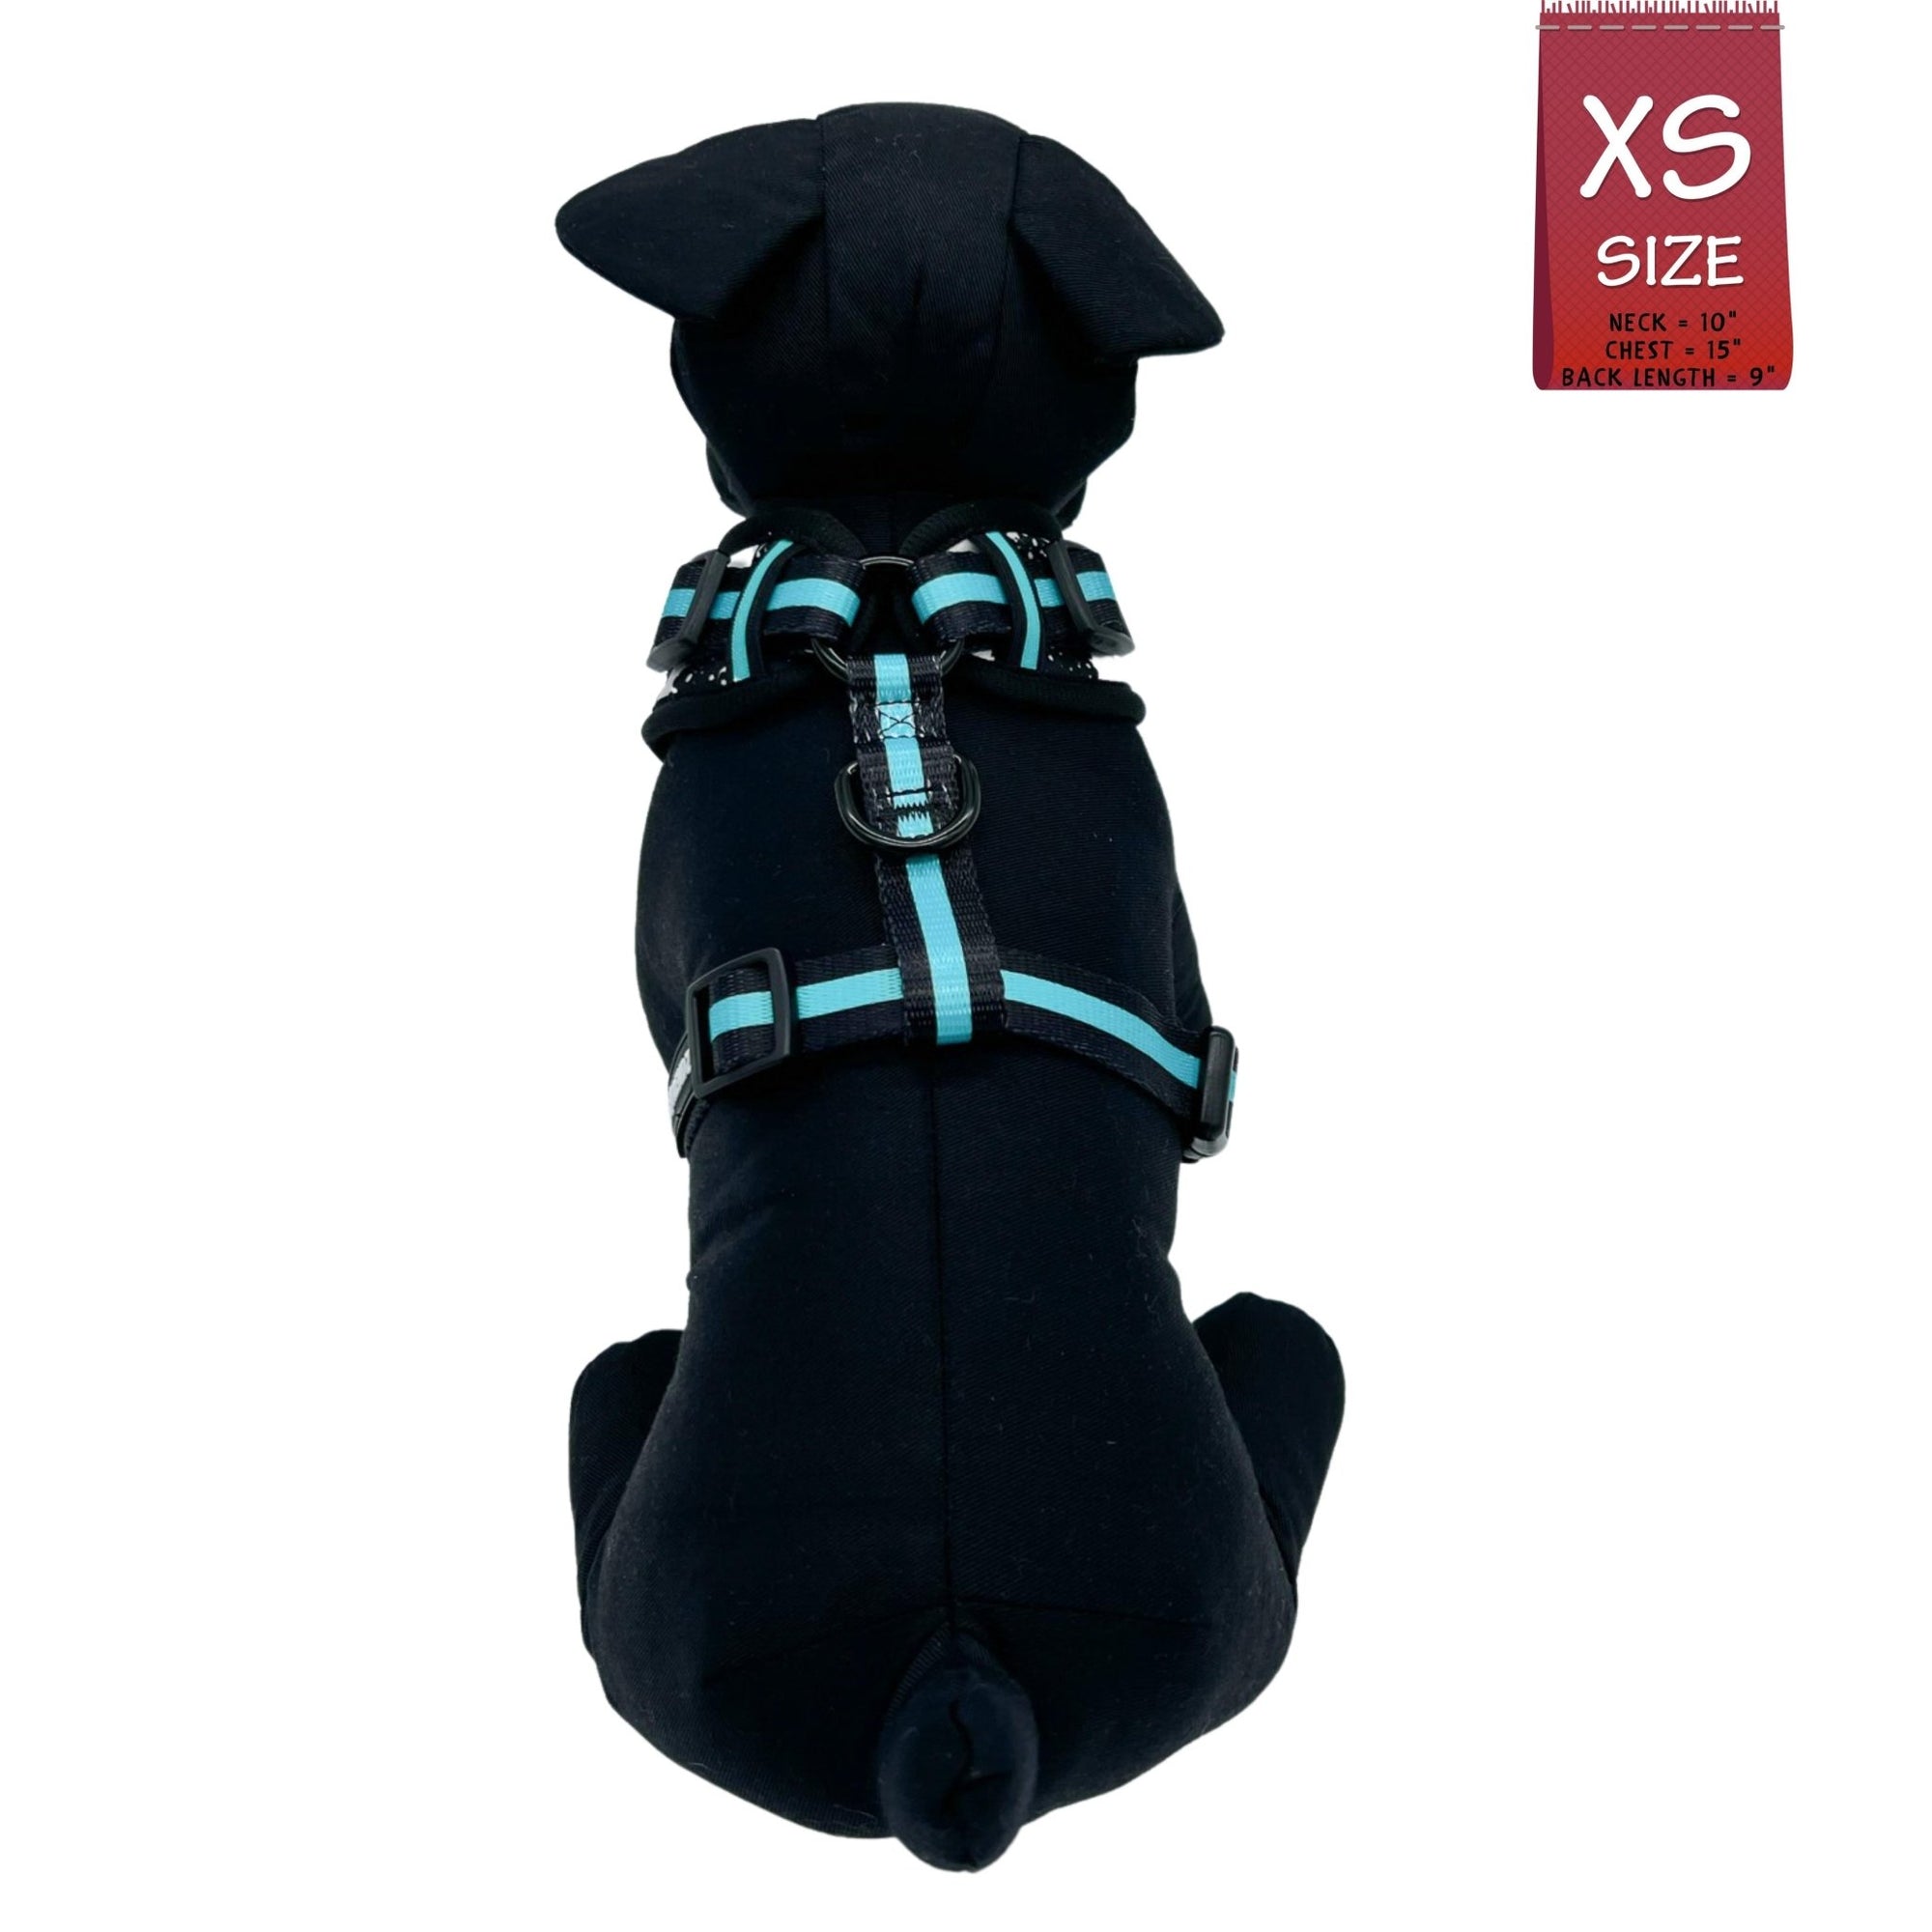 No Pull Dog Harness - black stuffed dog model wearing black adjustable harness with white paint splatter and teal accents - against a solid white background - Wag Trendz